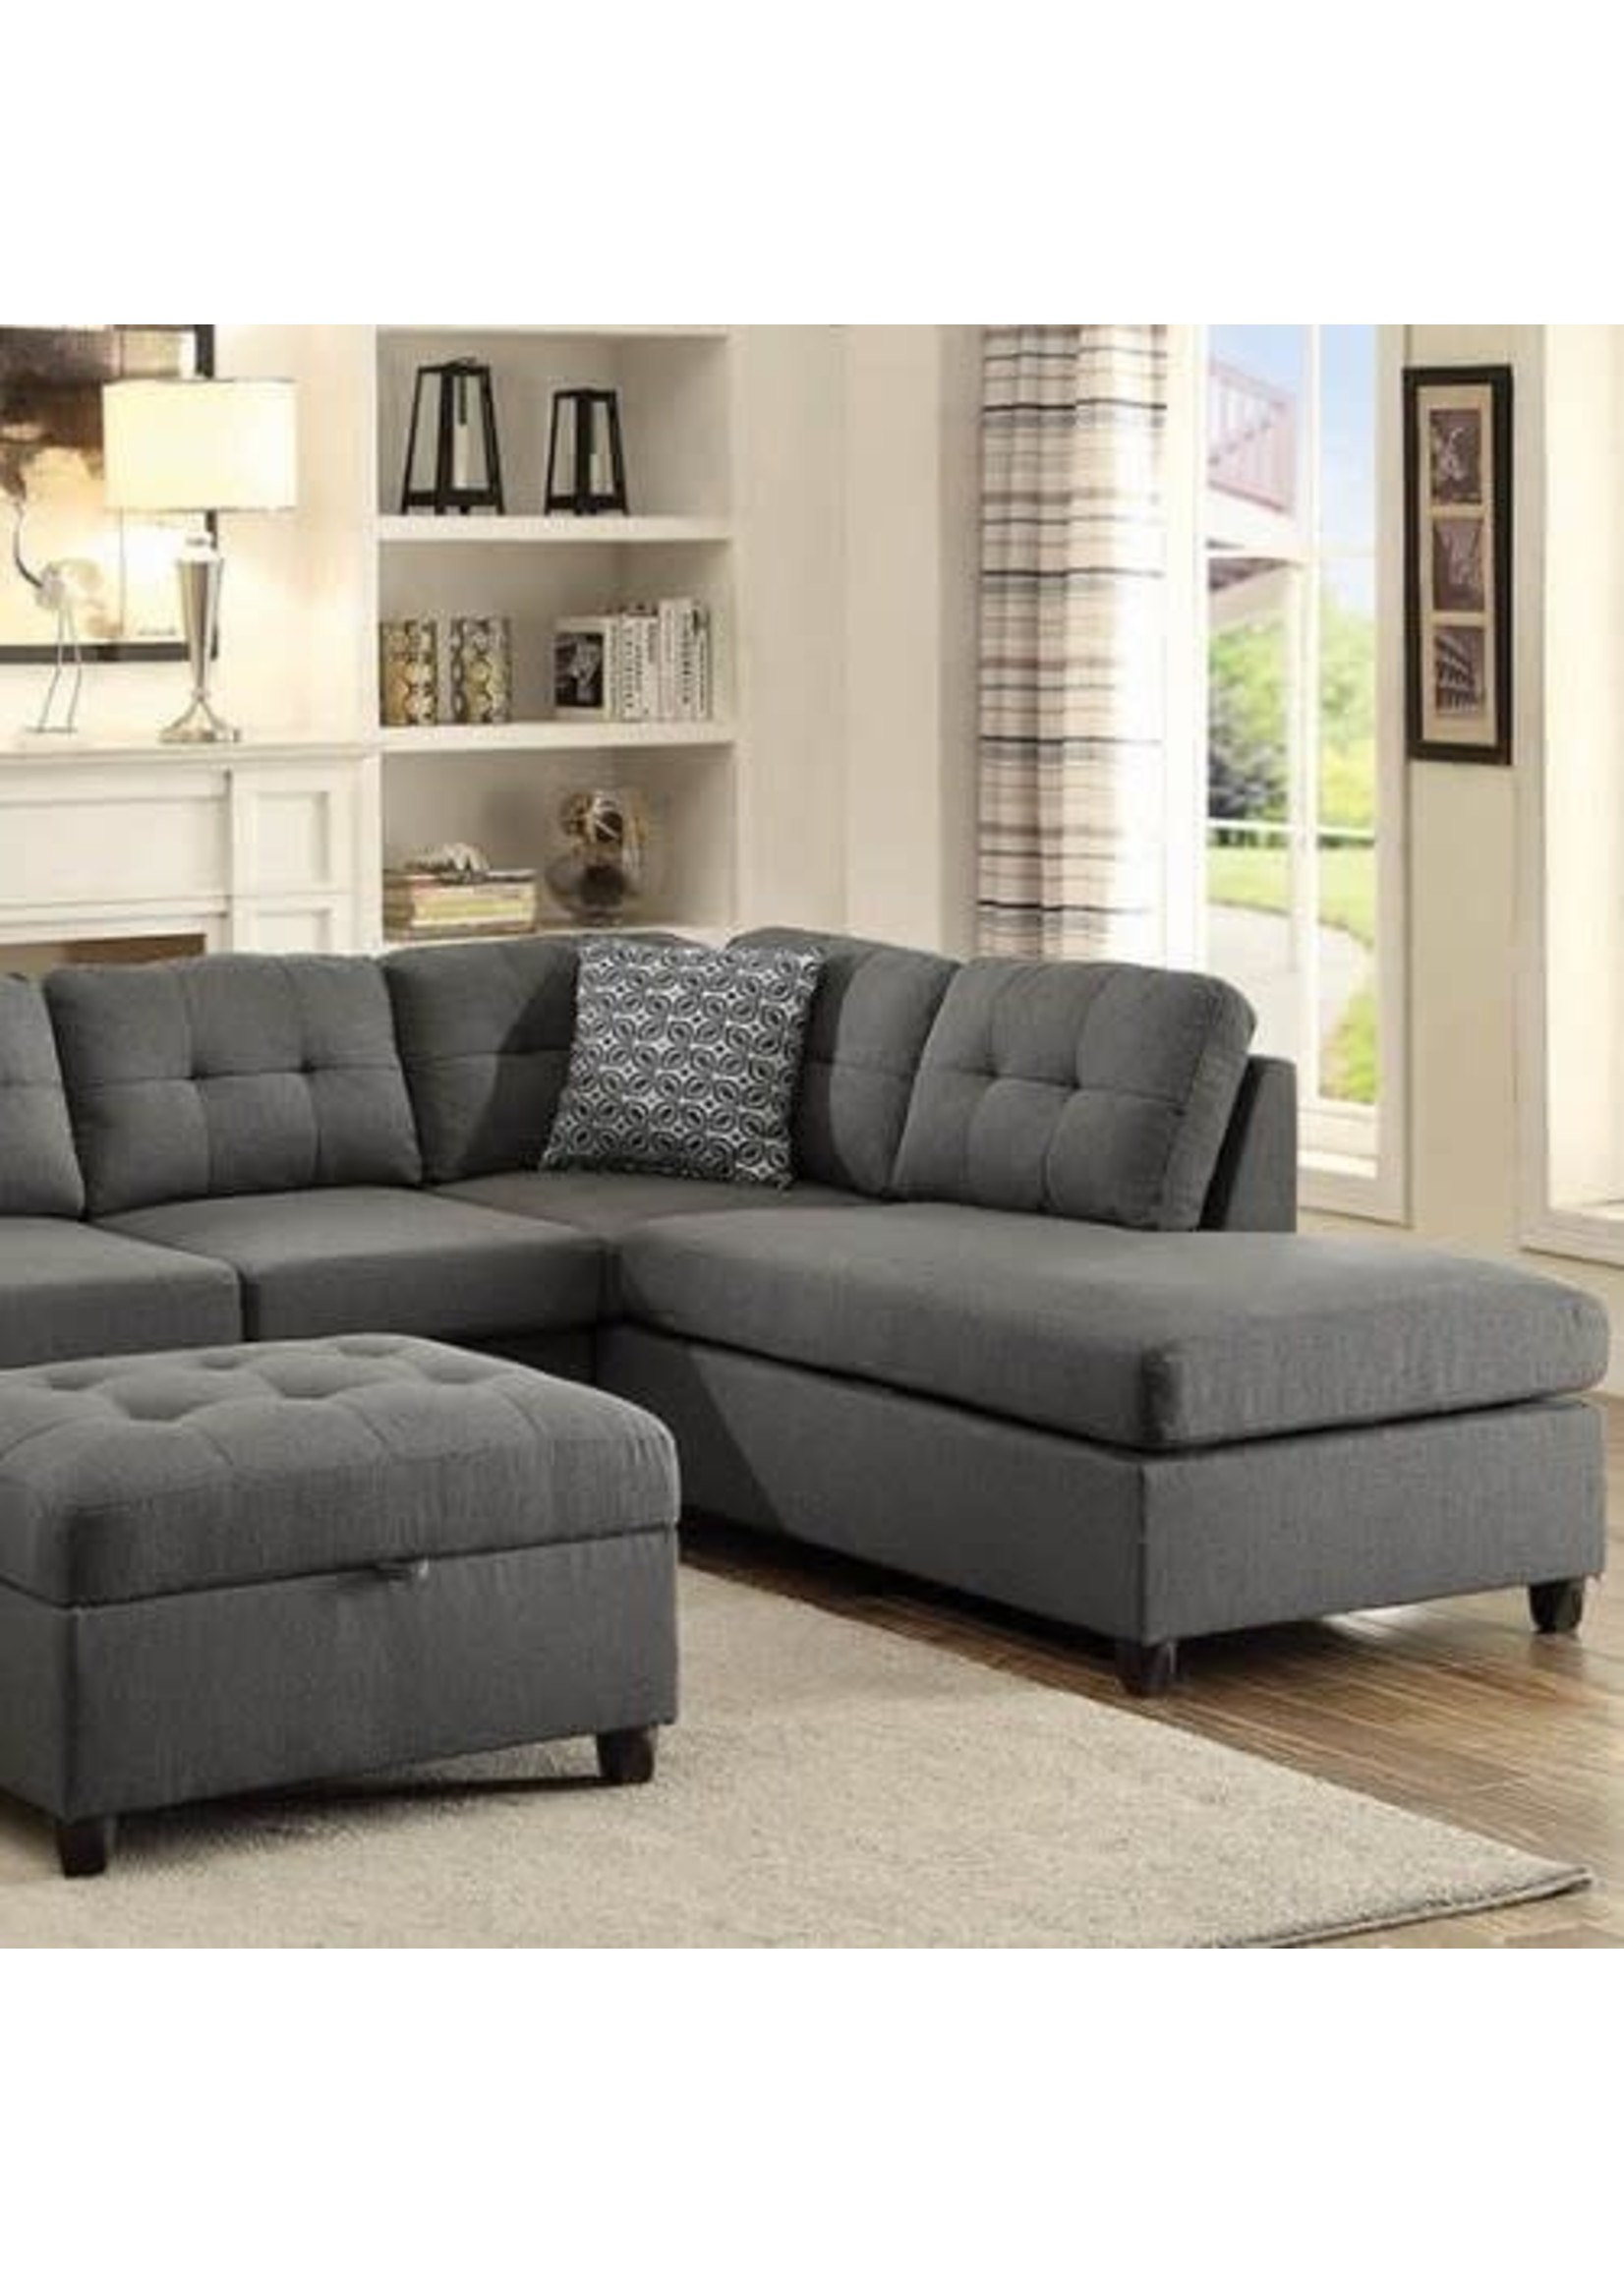 Coaster Furniture 500413-S2 Stonenesse Upholstered Tufted Sectional & Storage Ottoman 2Pc SET Grey